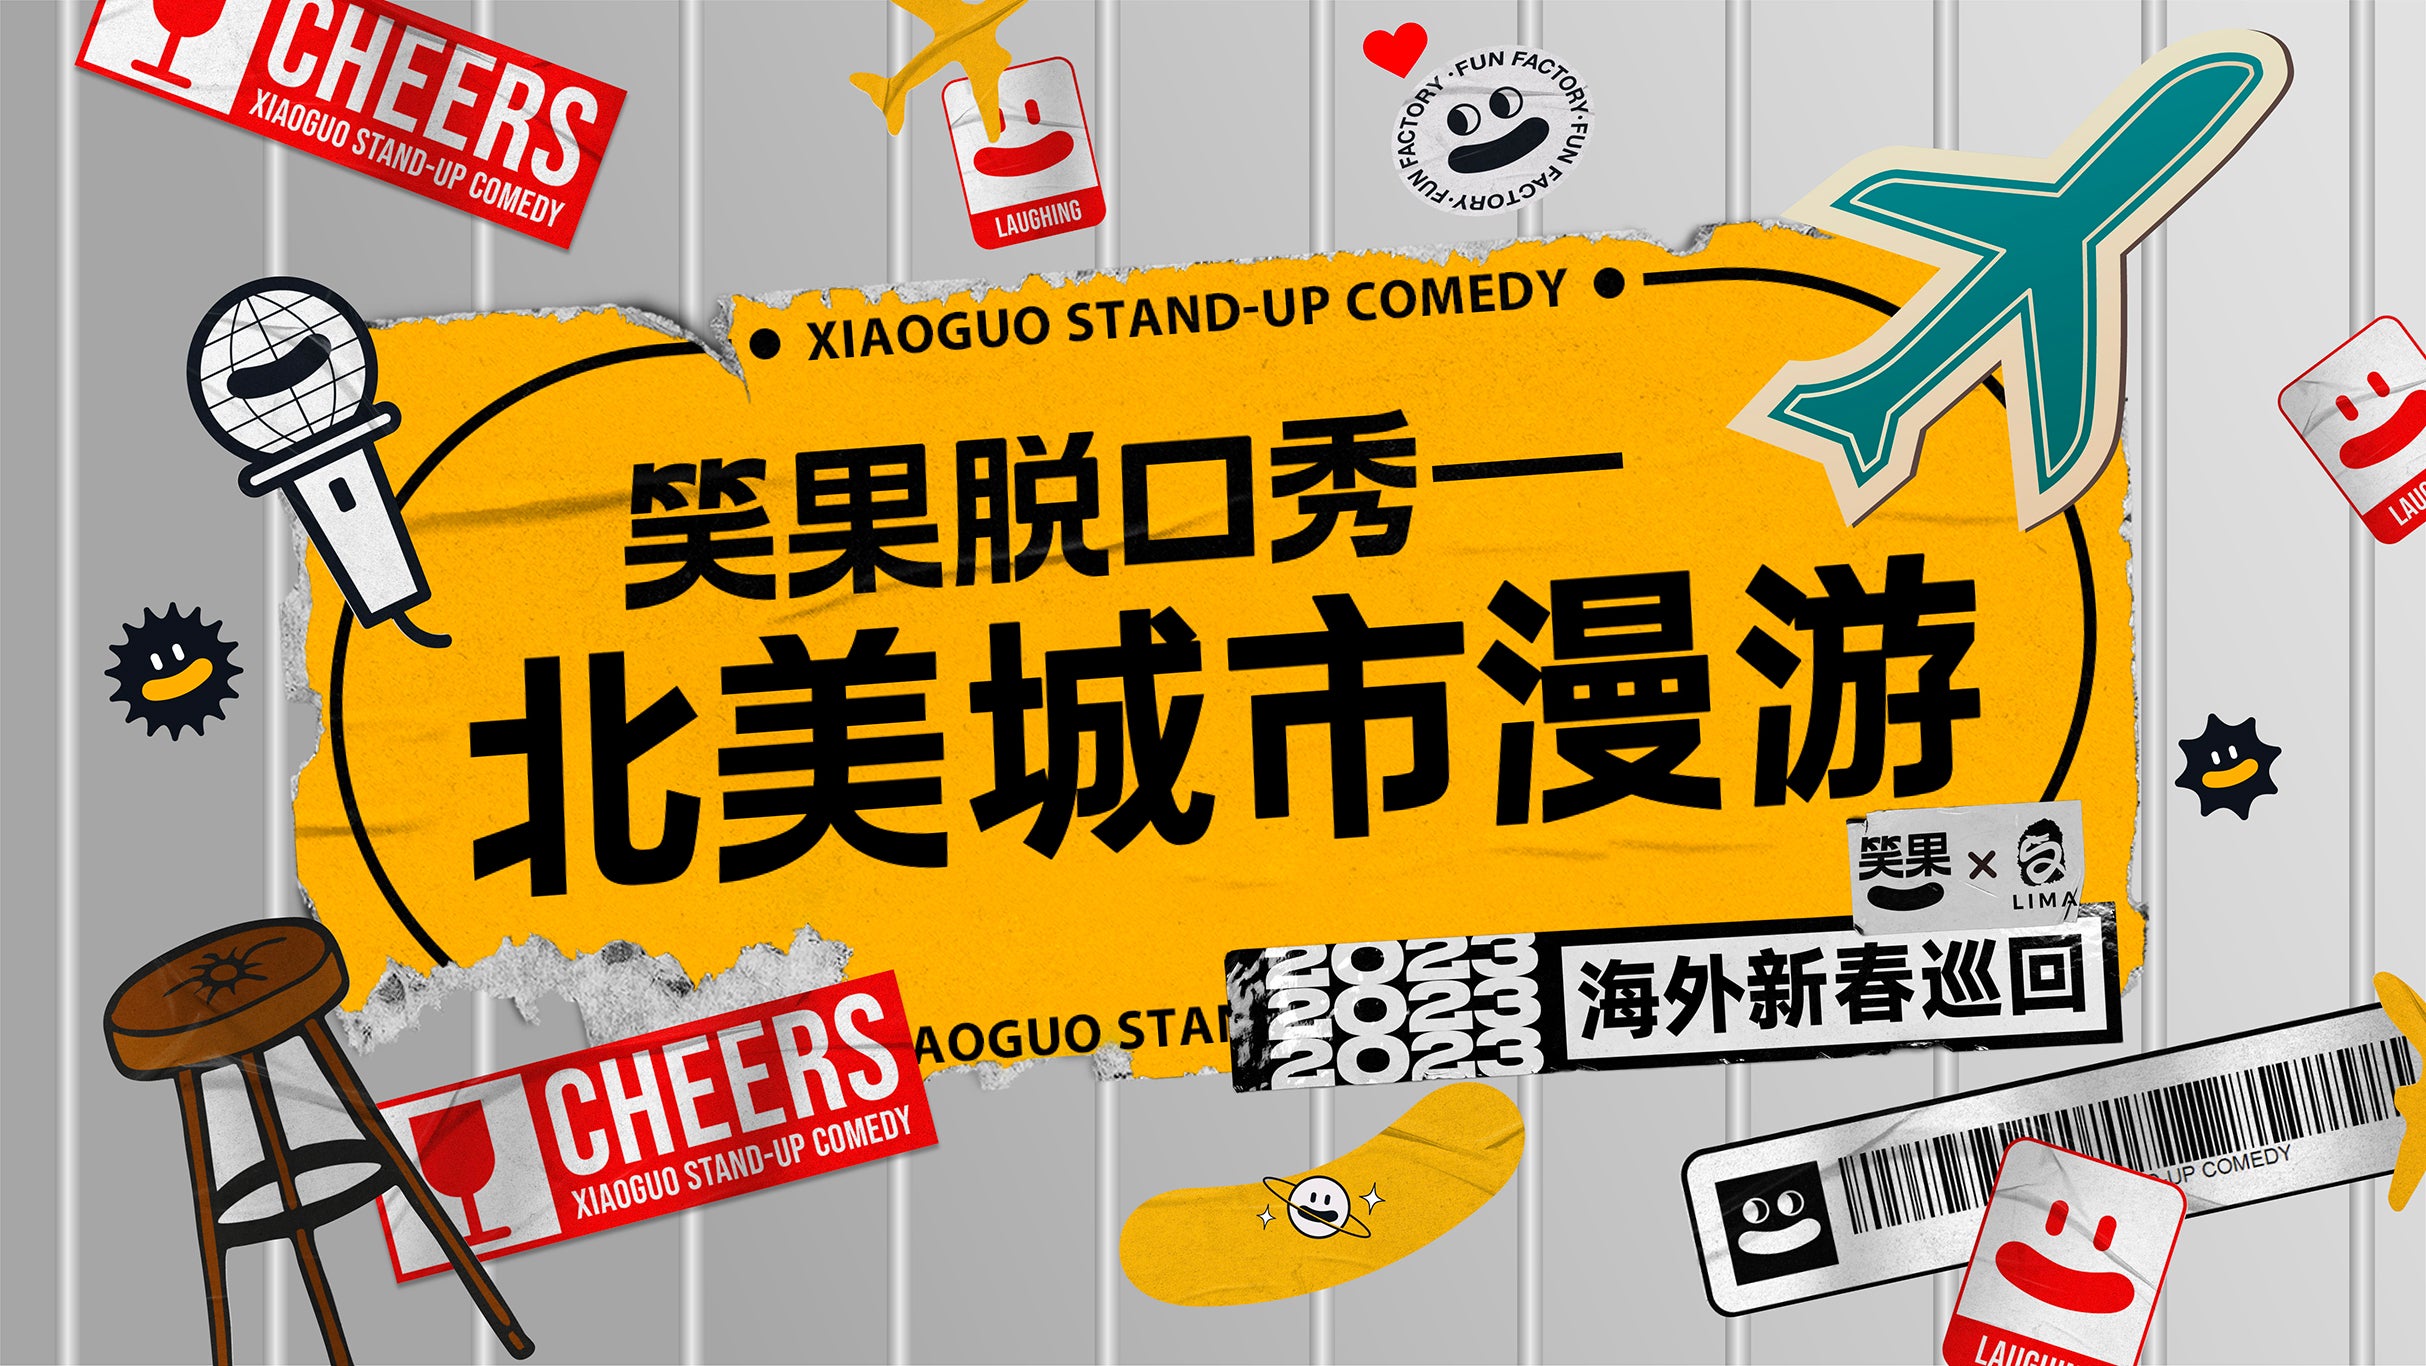 Xiaoguo Stand-Up Comedy City Roaming - 2023 World Tour in Chicago promo photo for Chase Cardmember Preferred presale offer code